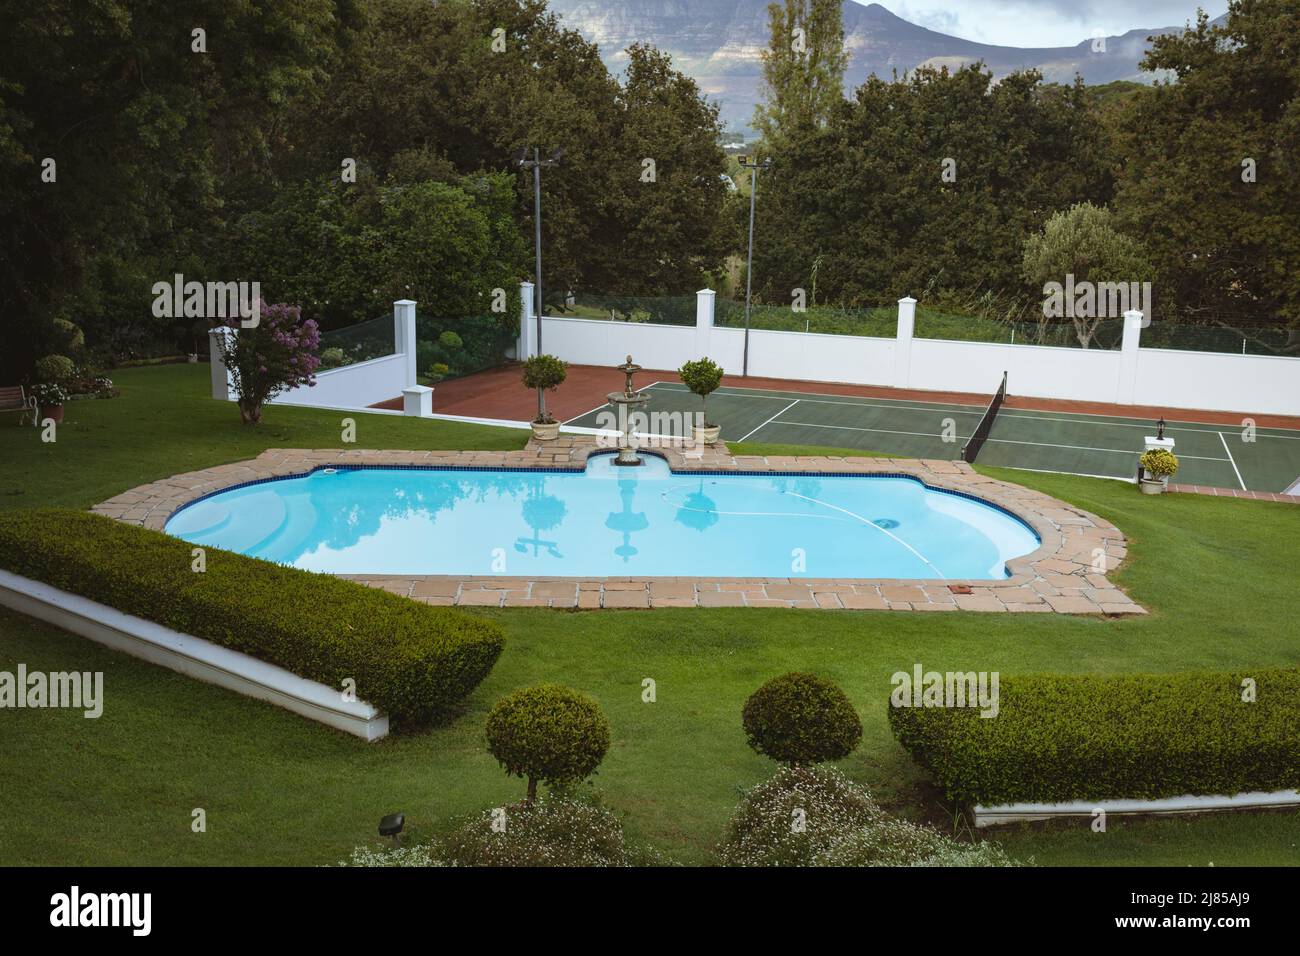 Swimming pool tennis court High Resolution Stock Photography and Images -  Alamy